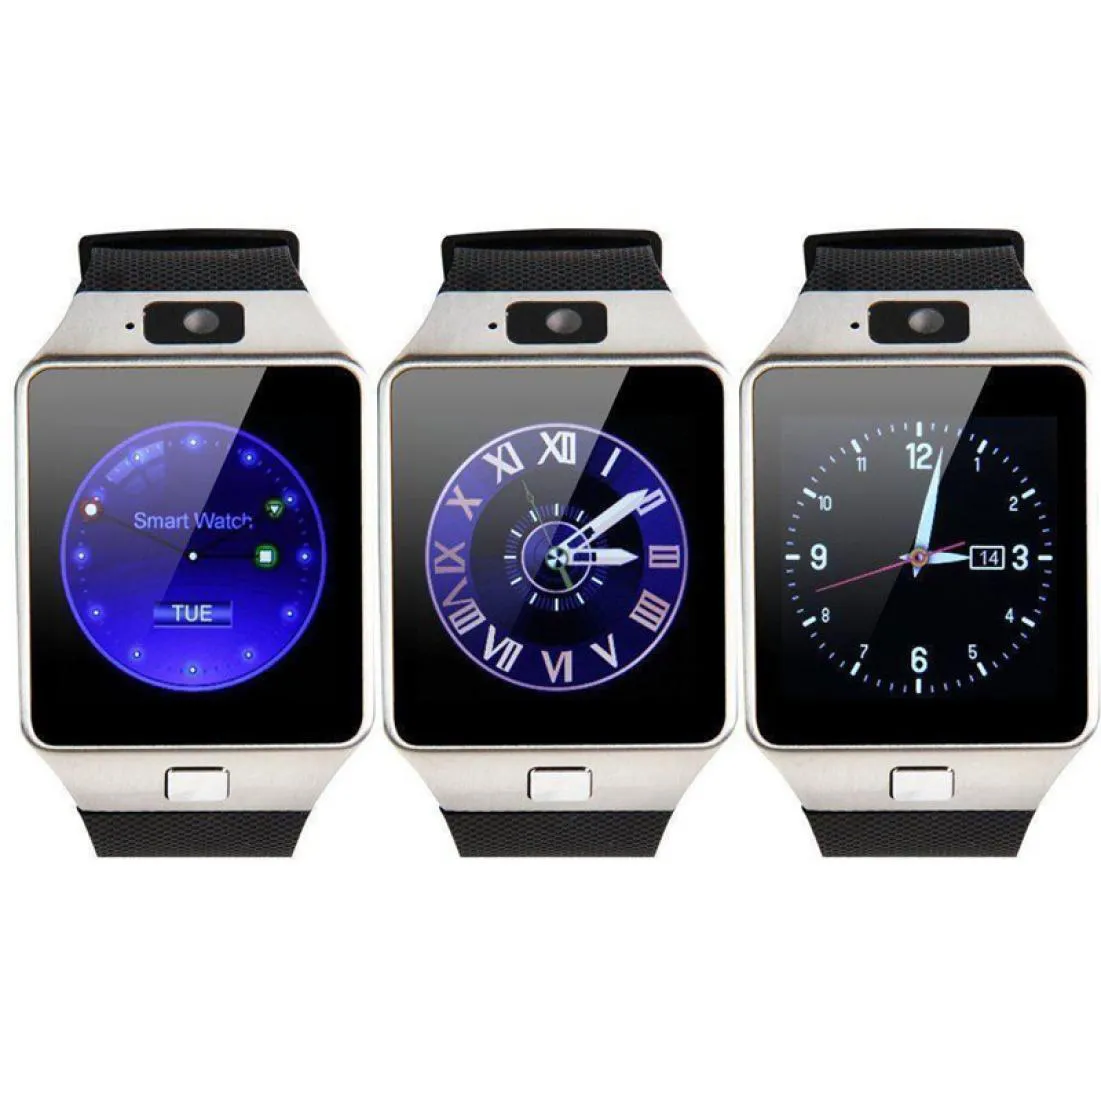 Bluetooth Smart Watch Smartwatch Dz09 Android TEON CALL RELOGIO 2G GSM SIM TF CARD CARD CARD IPhone Samsung Huawei9302410